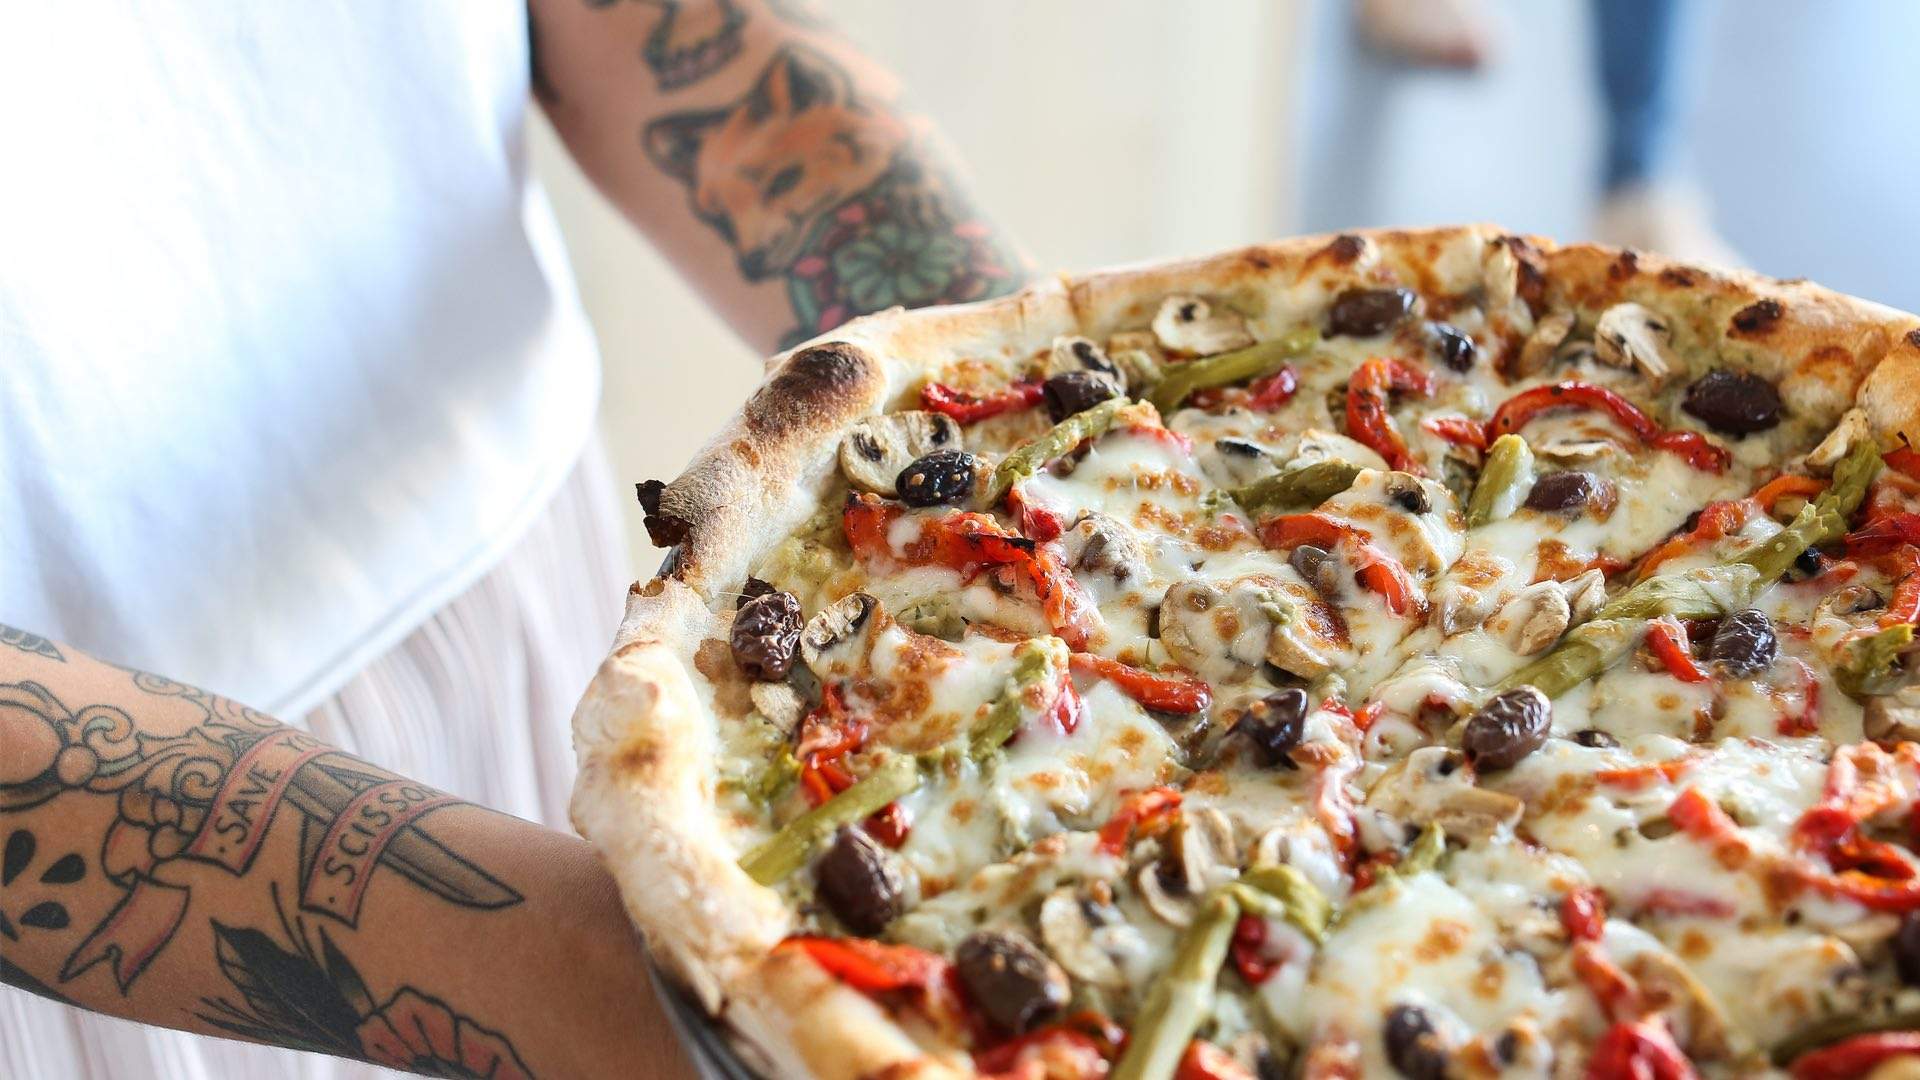 Coburg's Unconventional New Pizza Joint Is Launching with Free Pizza Today